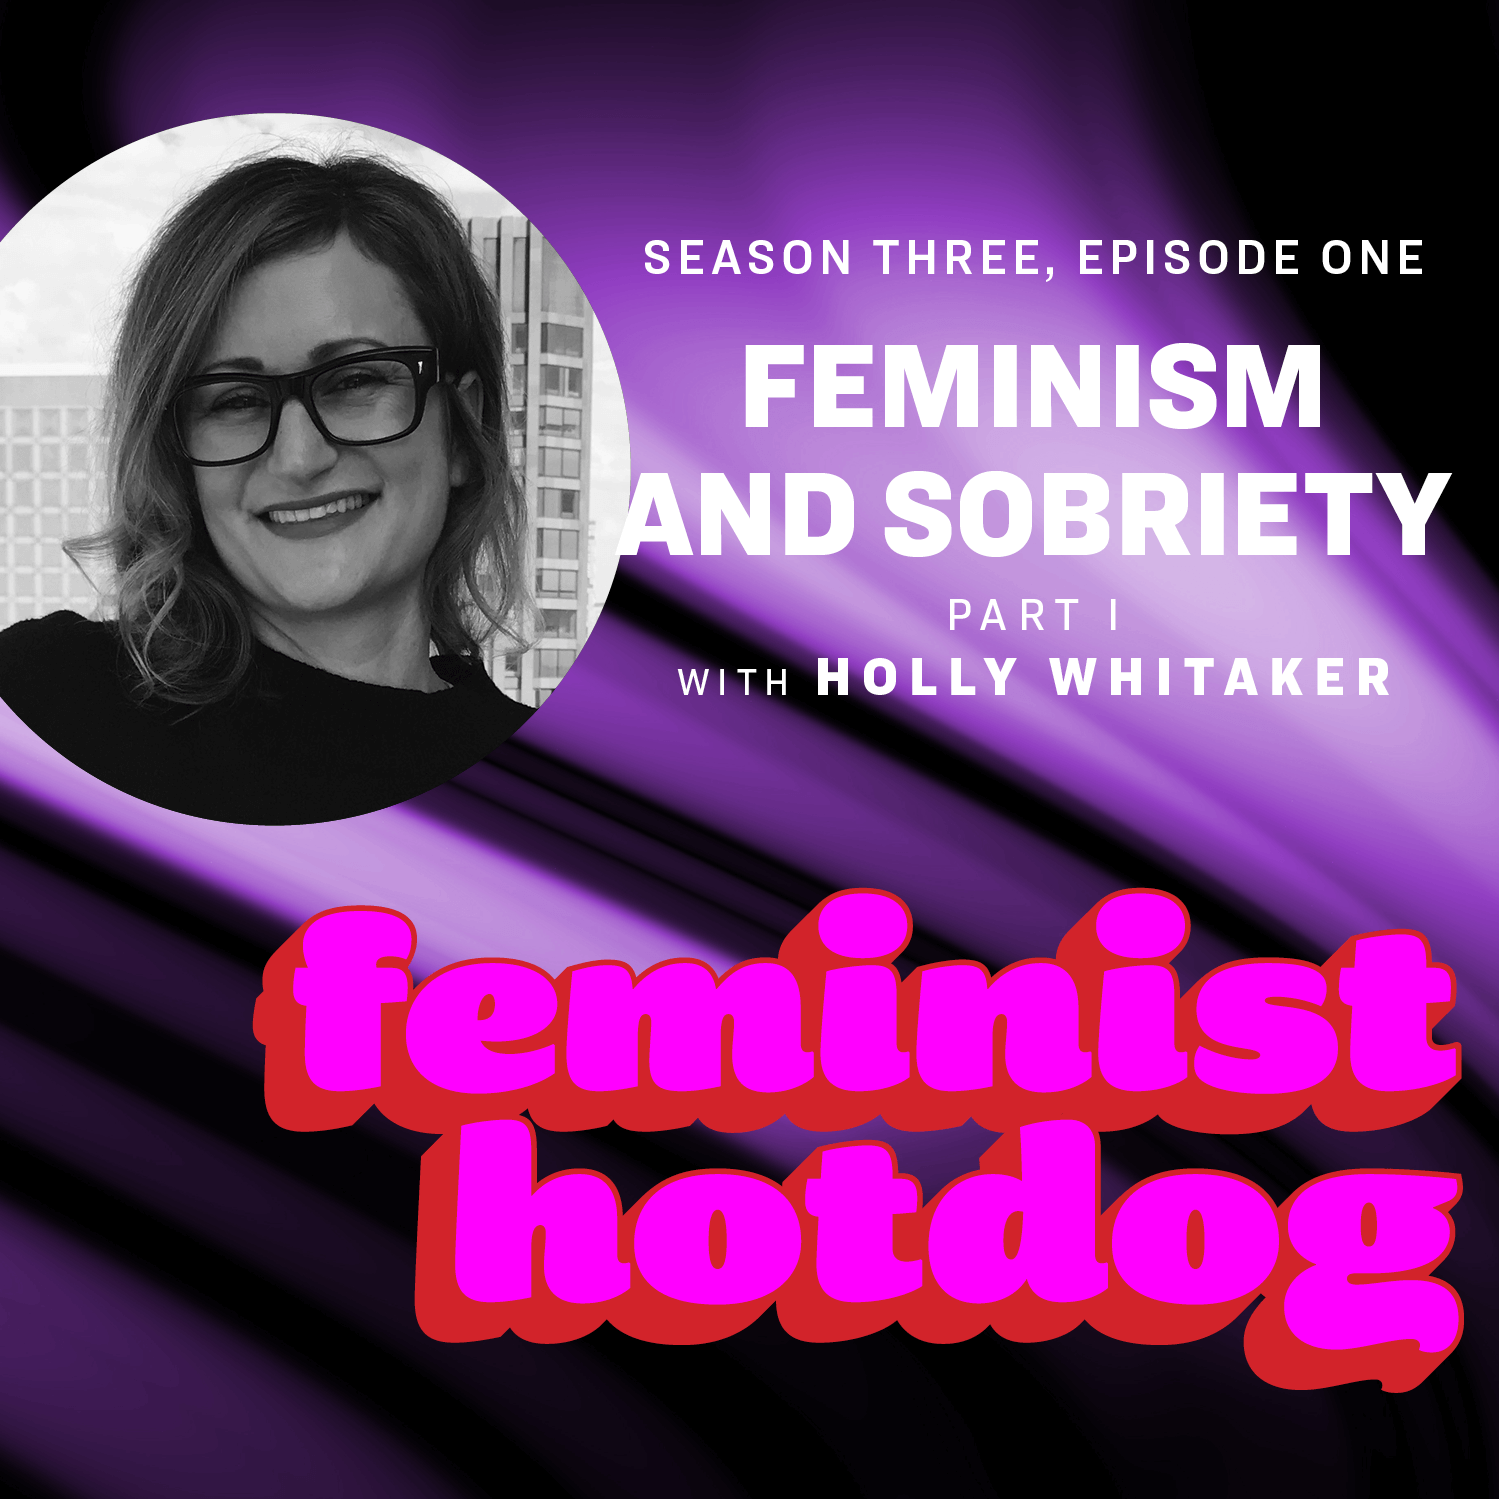 Feminism and Sobriety - Part I with Holly Whitaker